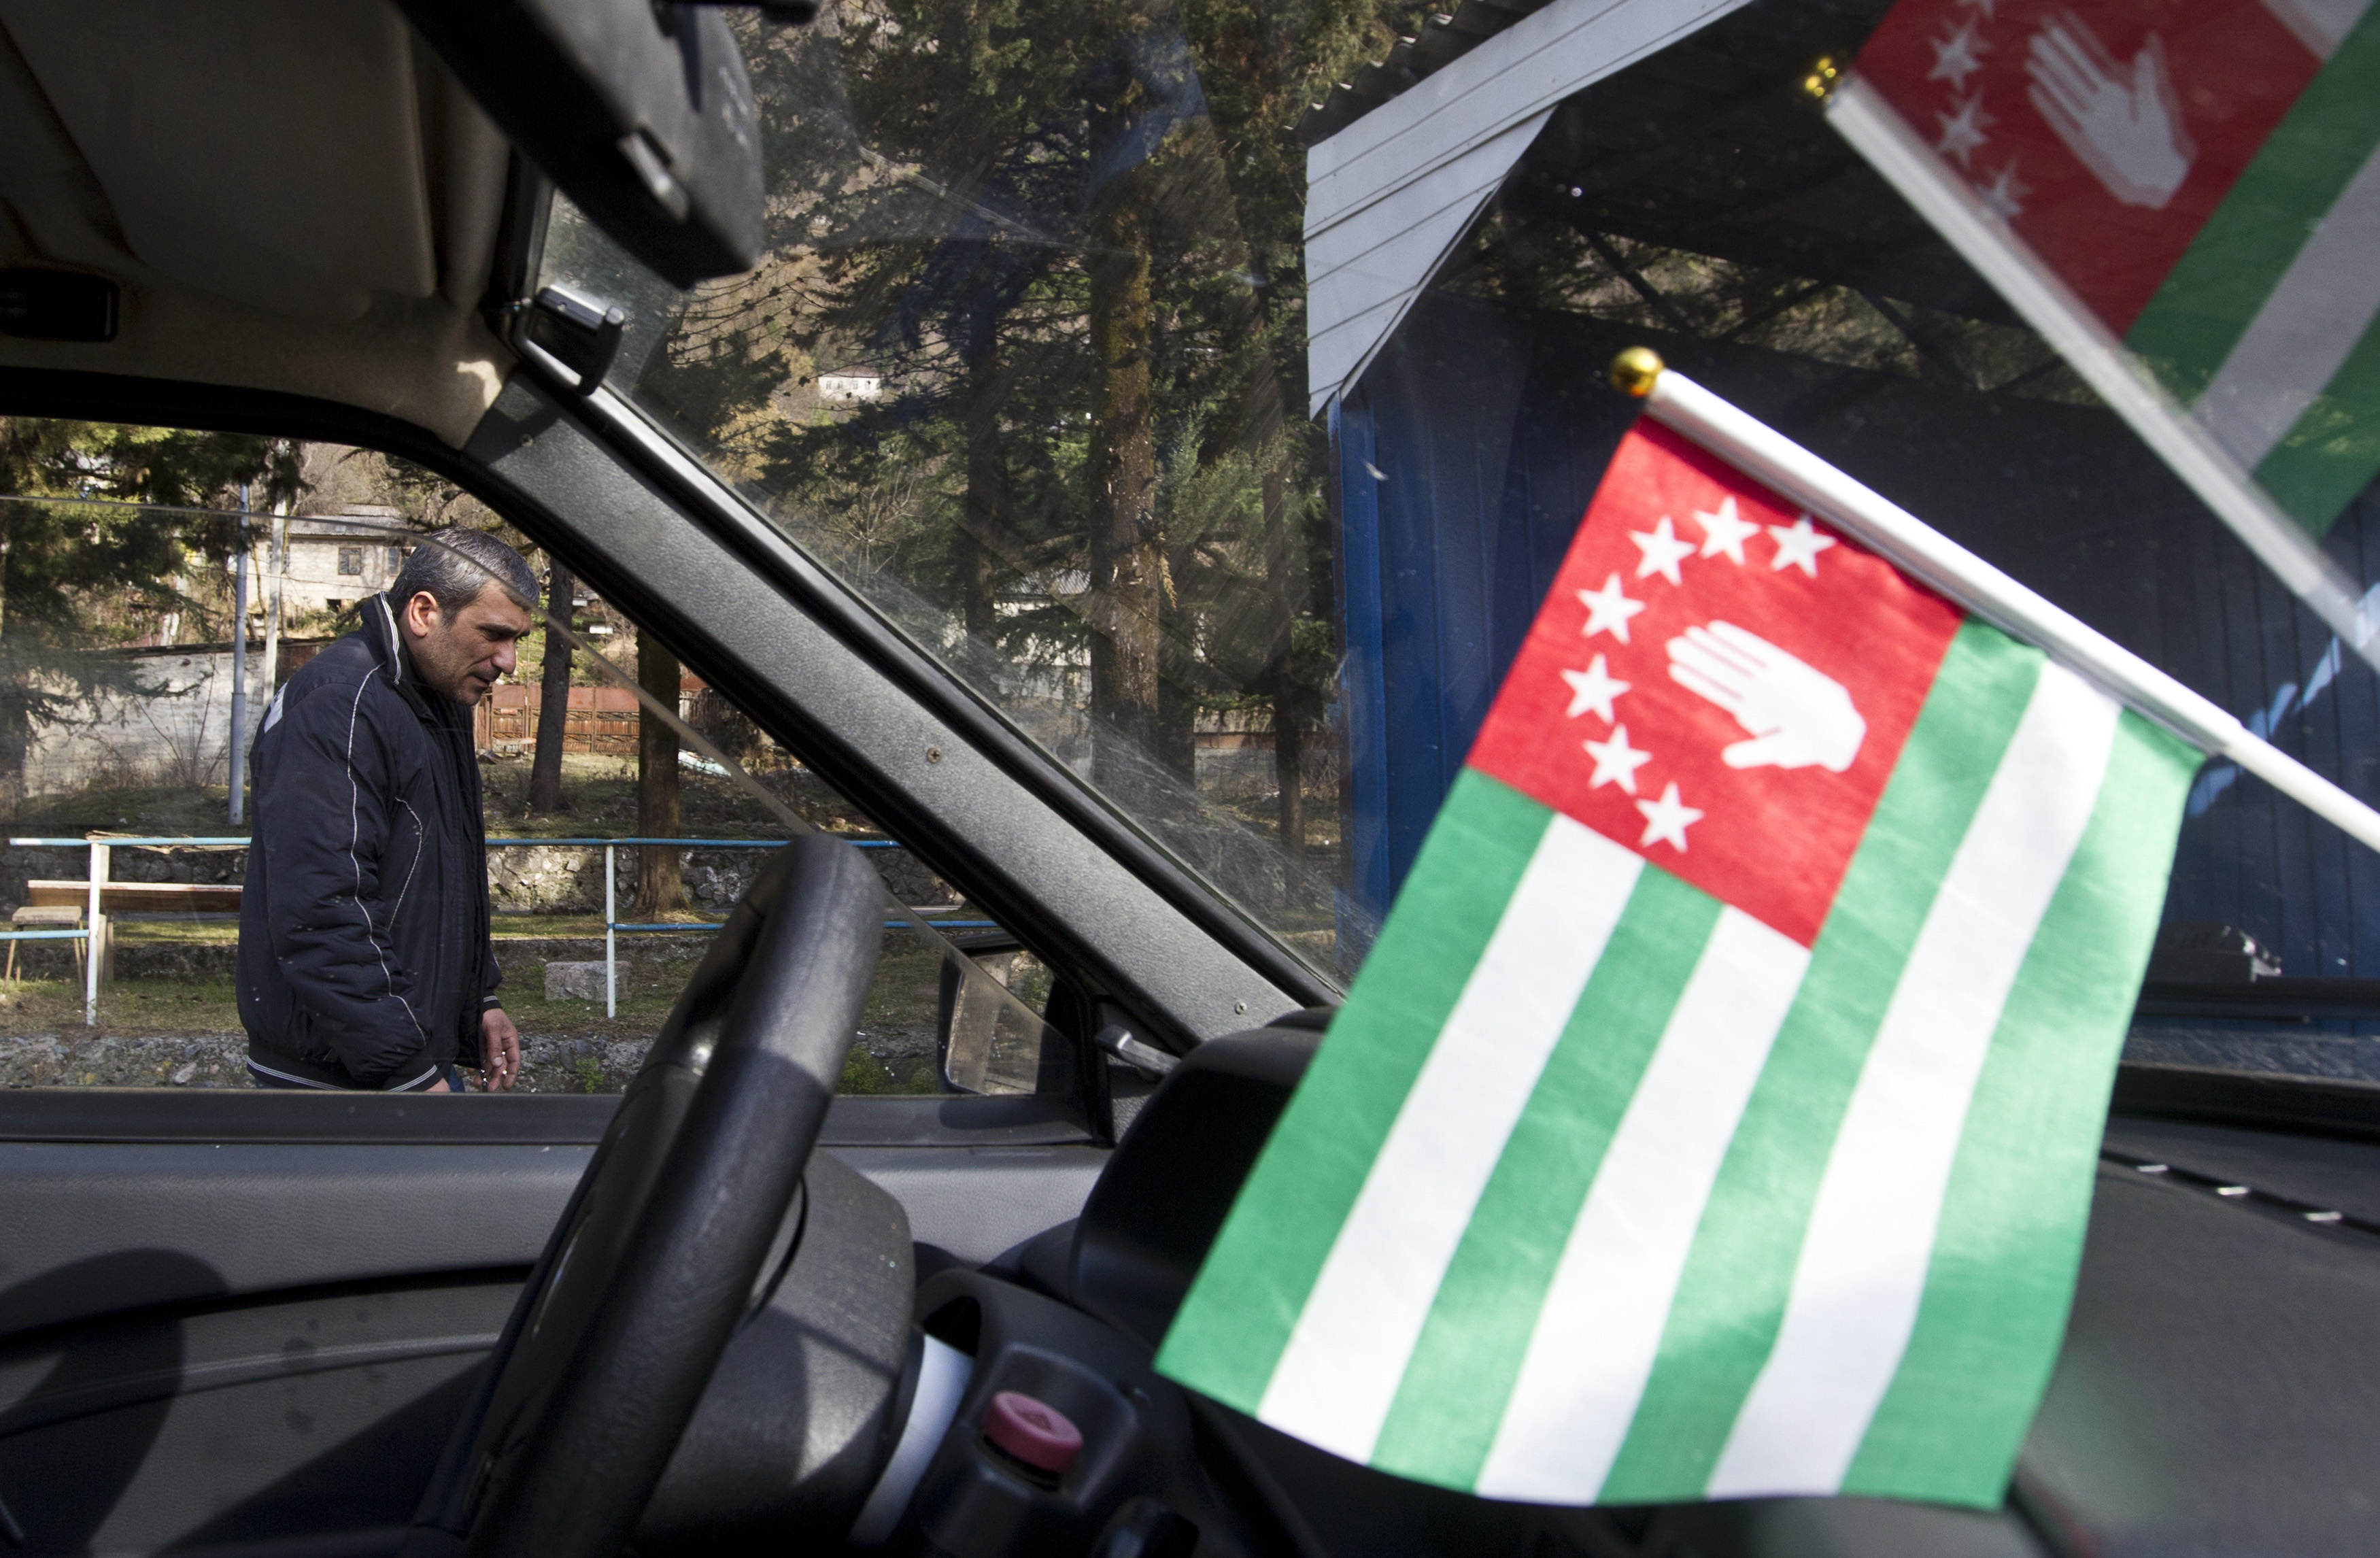 A flag of Abkhazia is on display inside a car in the town of Tkvarcheli, southeast of Sukhumi, the capital of Georgia's breakaway region of Abkhazia Dec. 27, 2013. (Maxim Shemetov—Reuters)